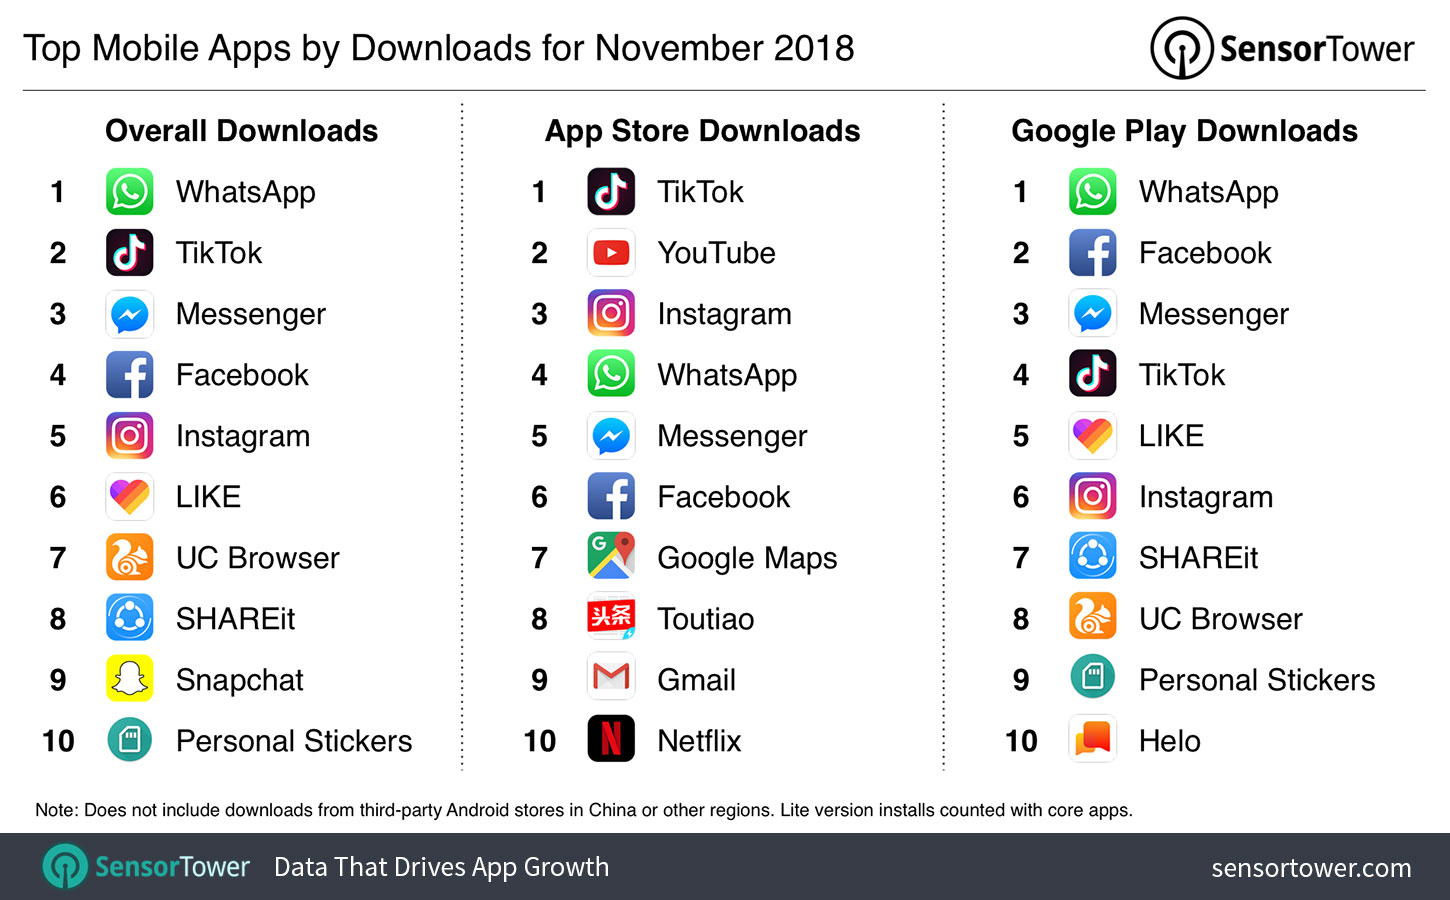 Top Mobile Apps by Downloads for November 2018